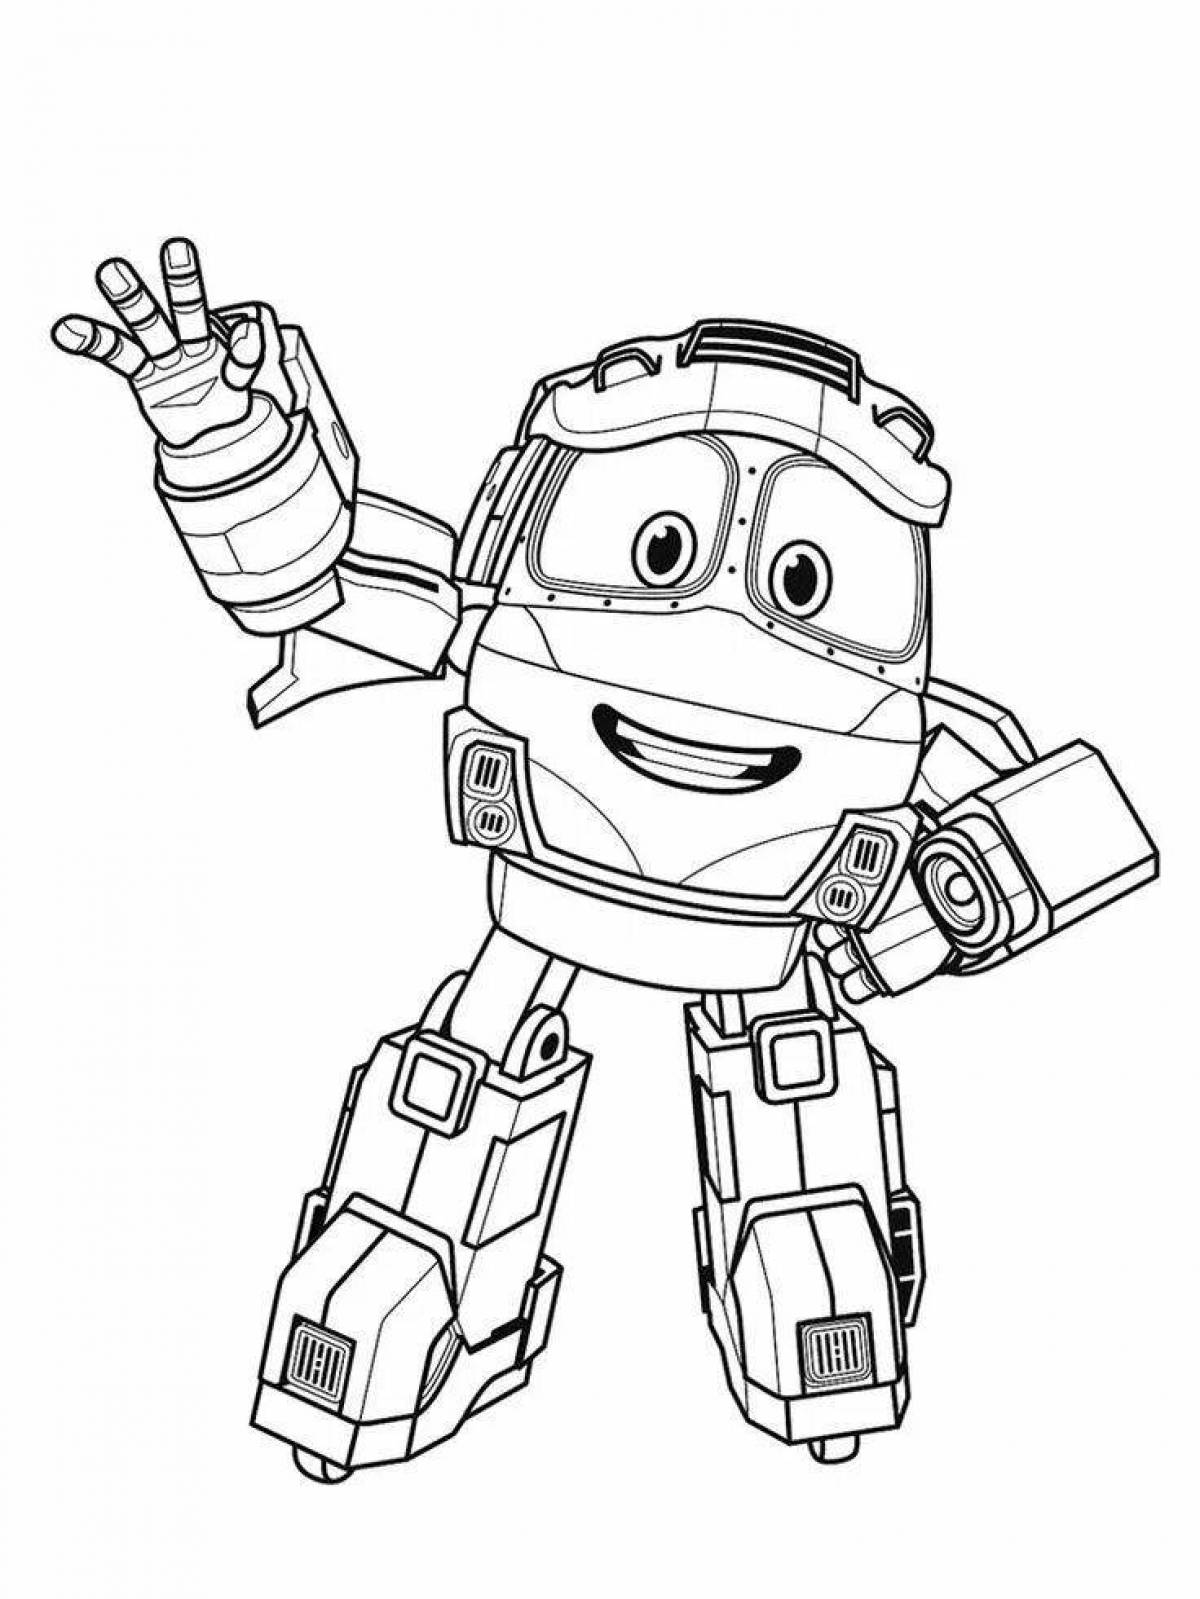 Colored robots kay train coloring book